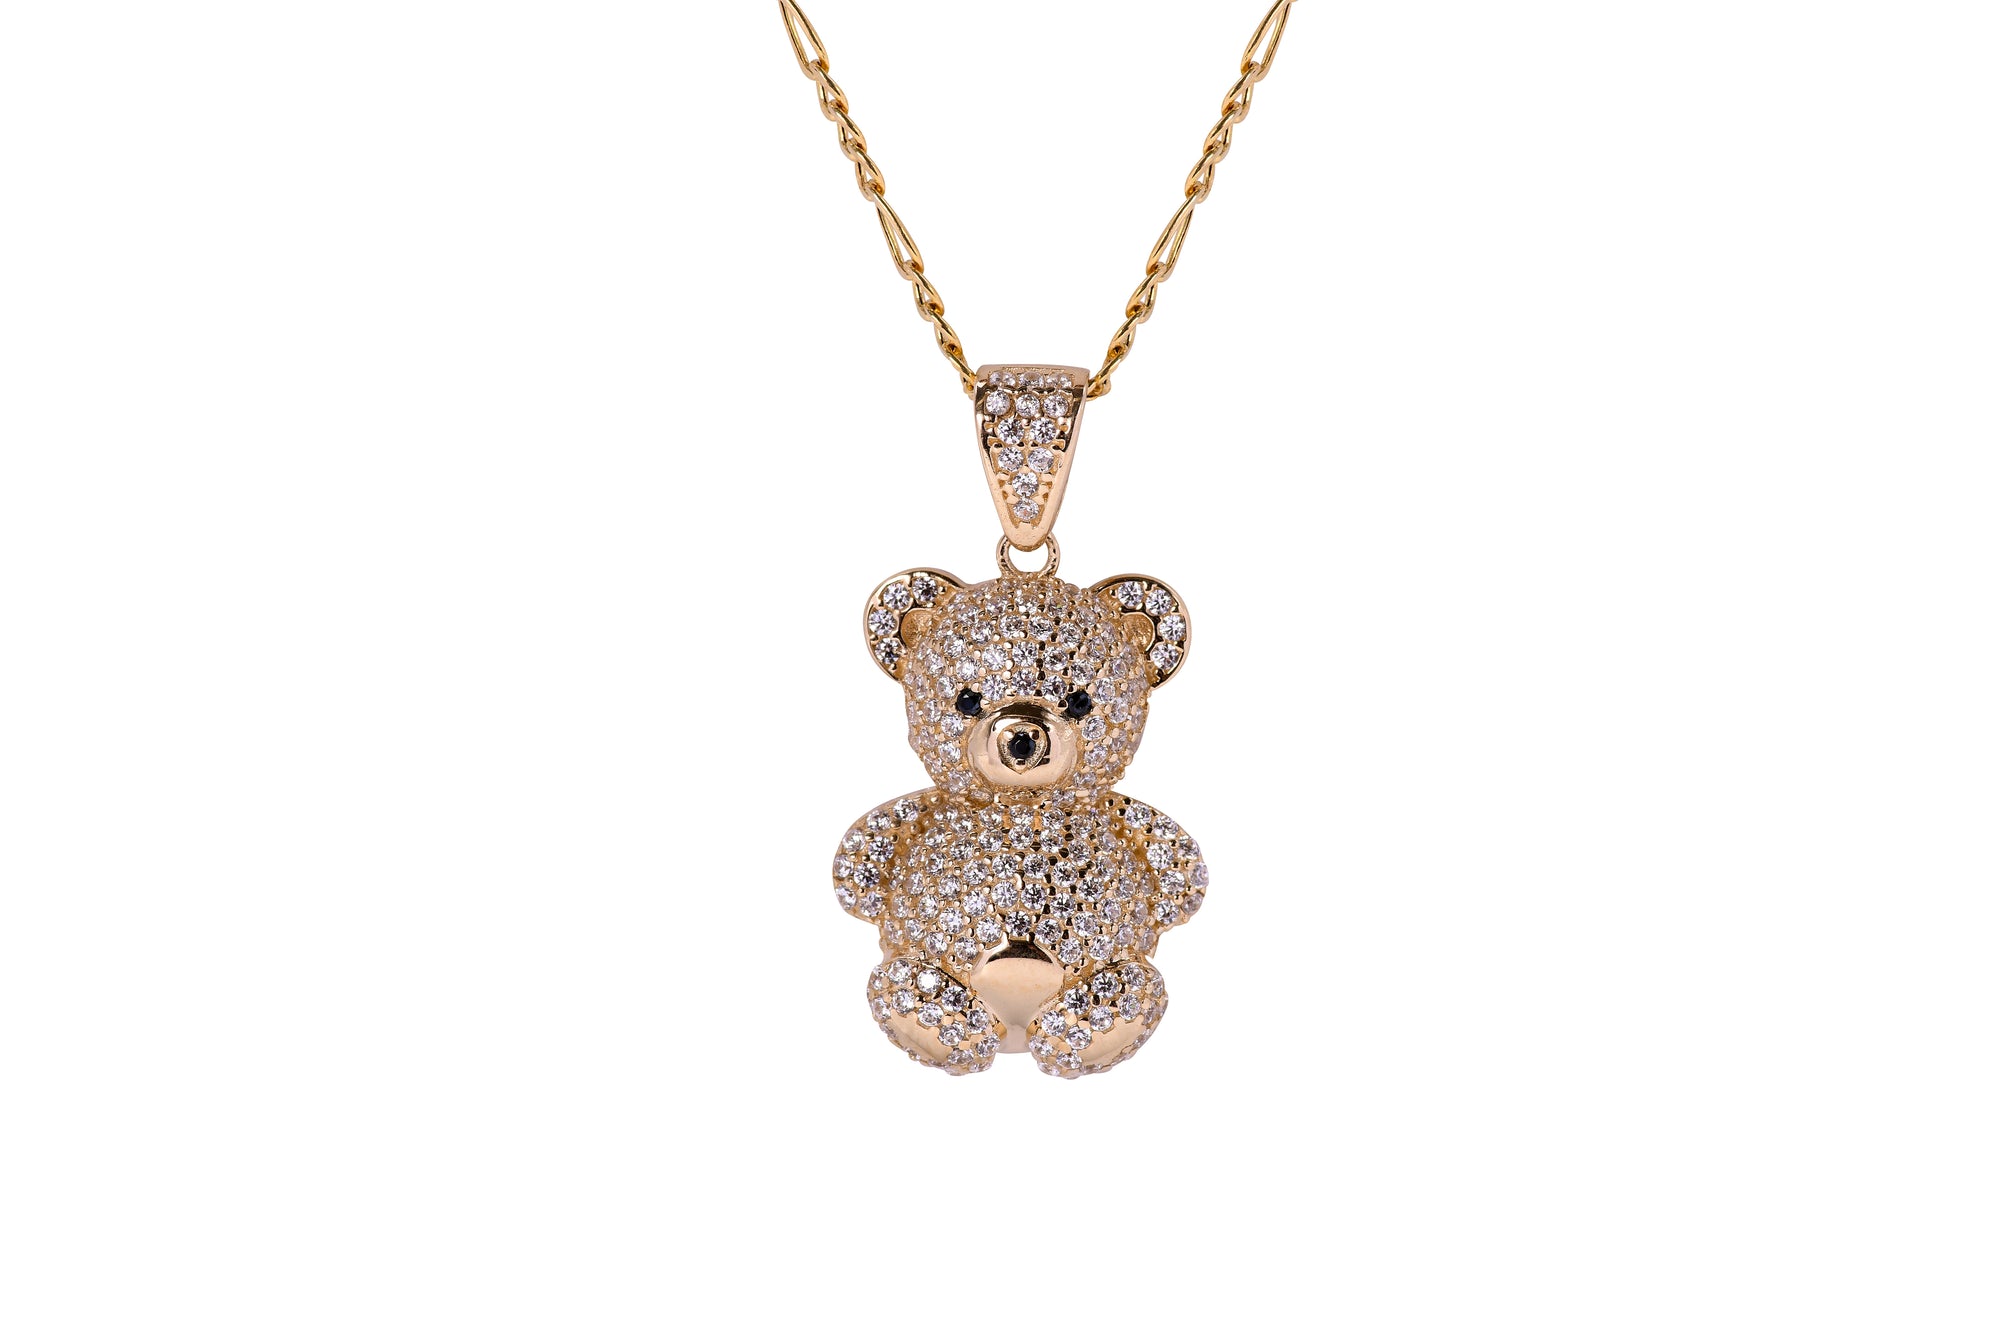 3D Bear Charm Necklace - Sterling Silver - FashionJunkie4Life